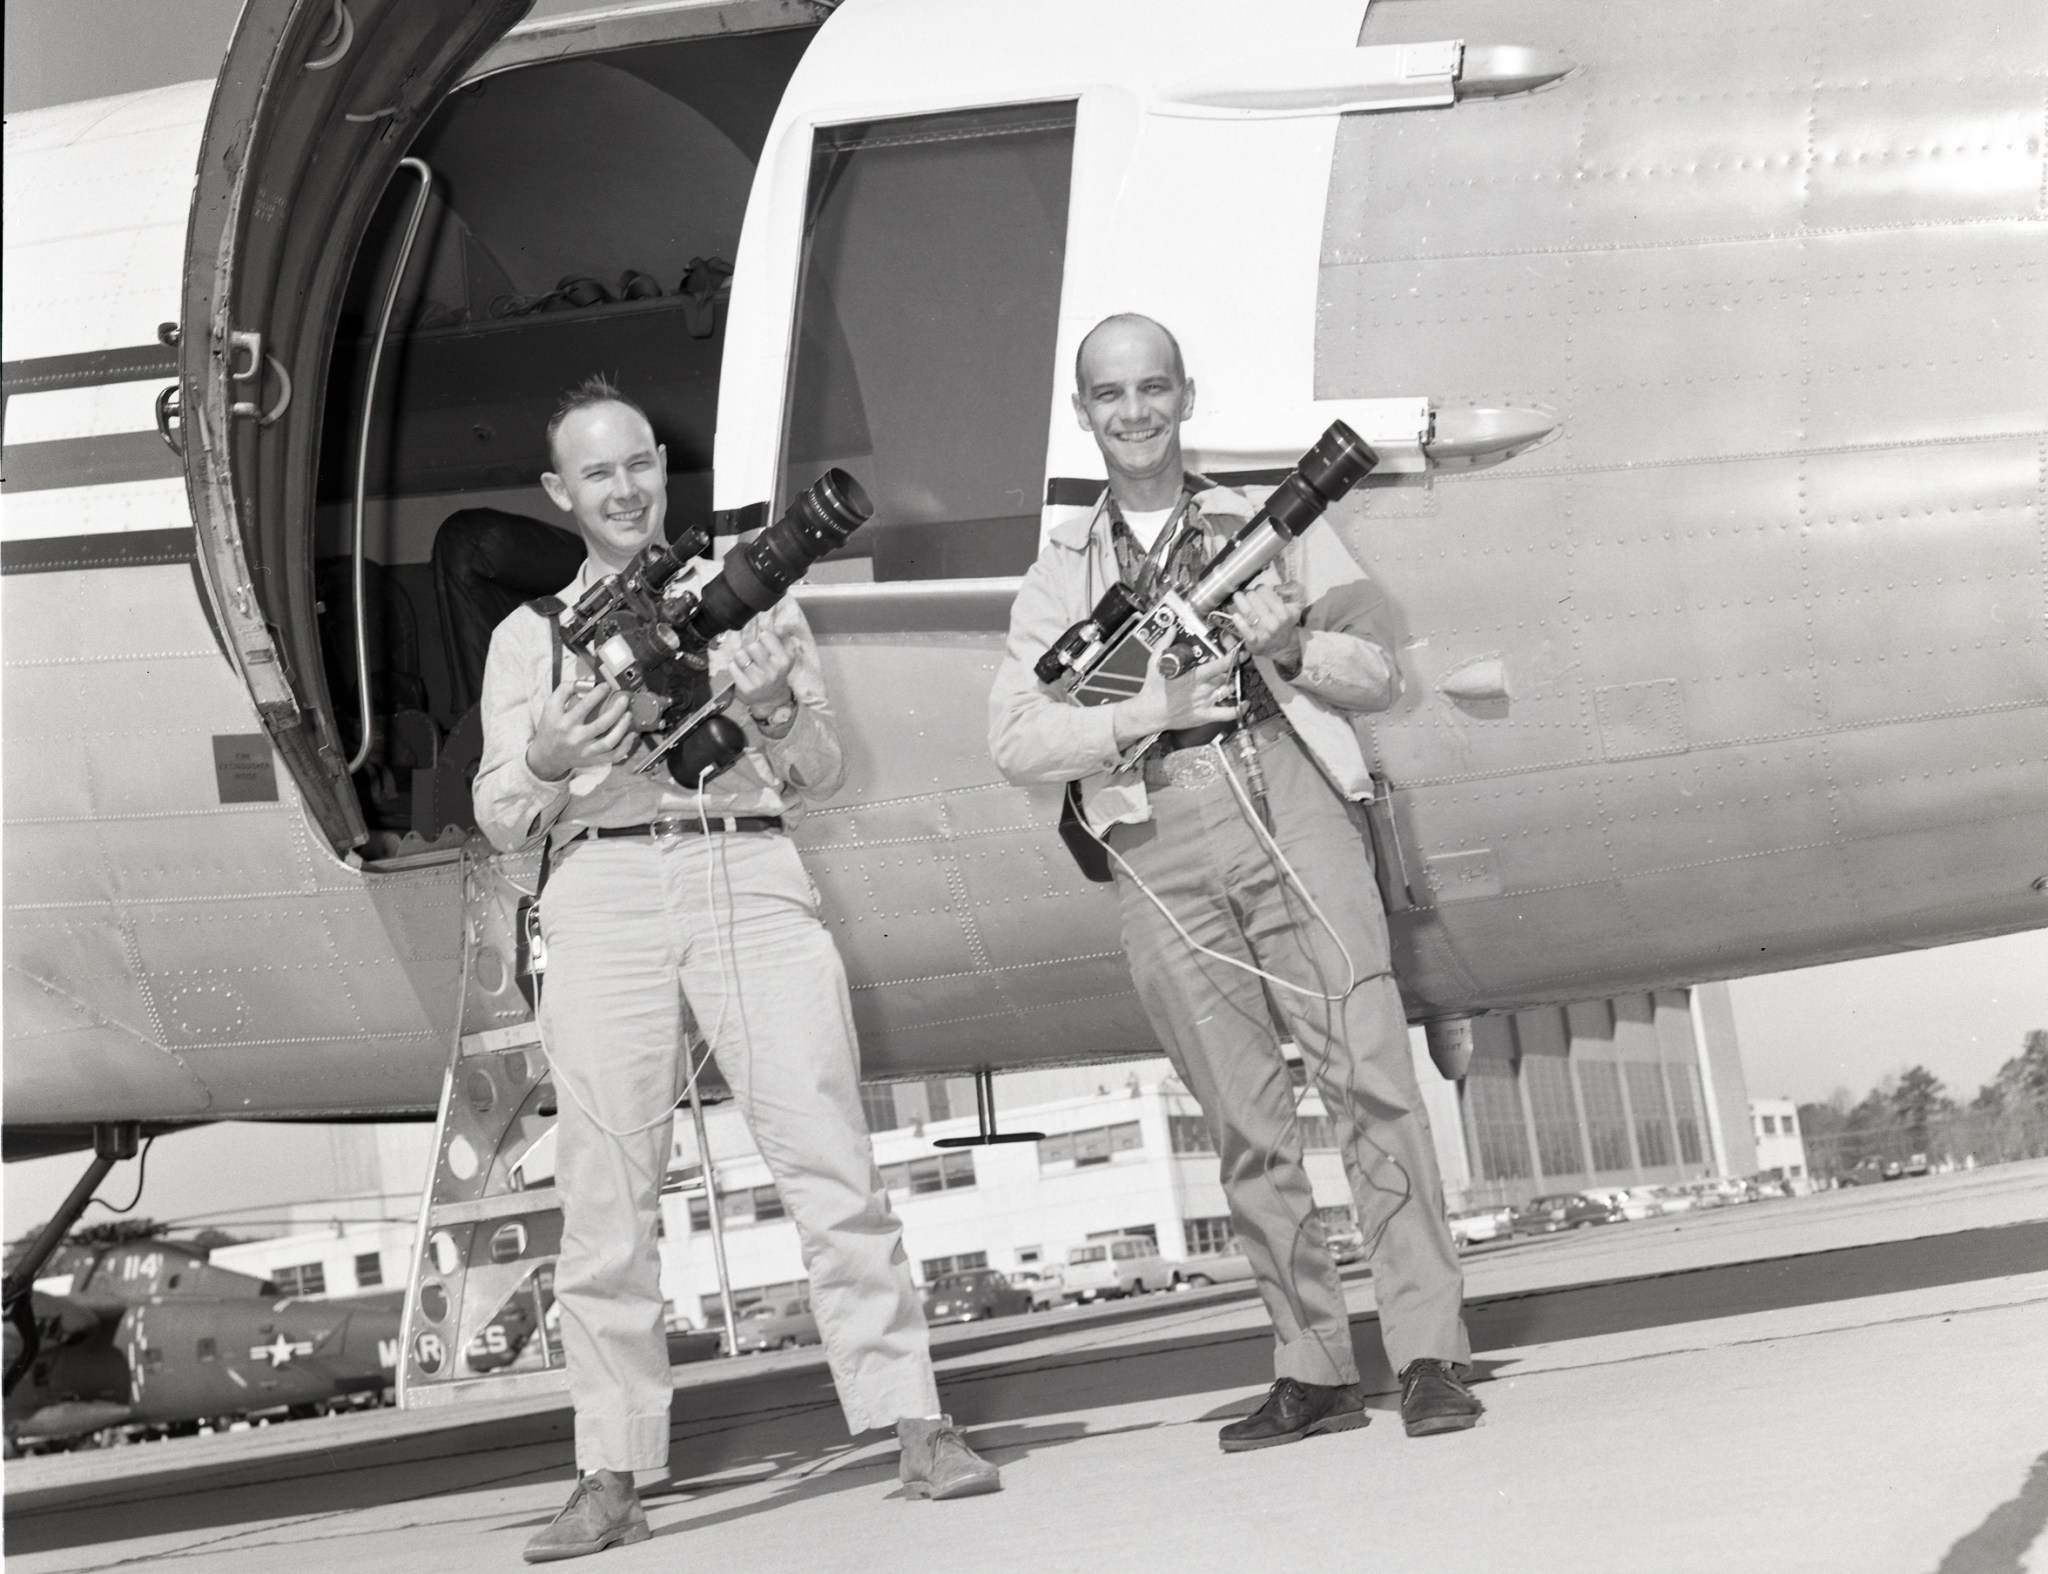 Two men with cameras beside aircraft.